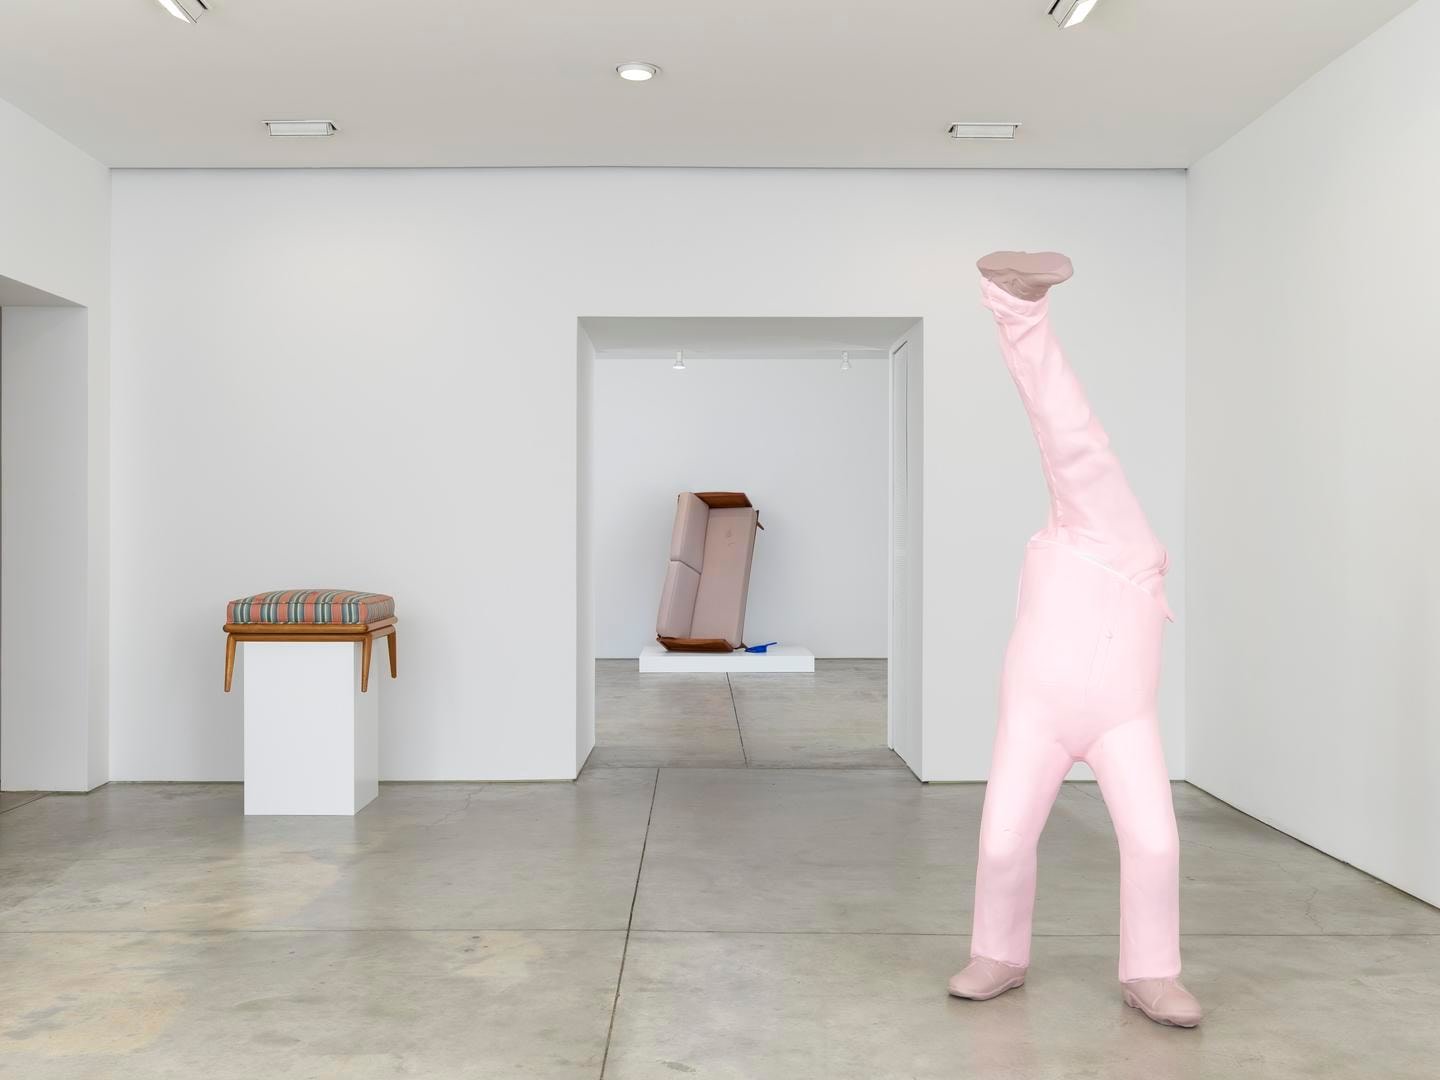 Erwin Wurm, Ethics demonstrated in geometrical order installation view 1